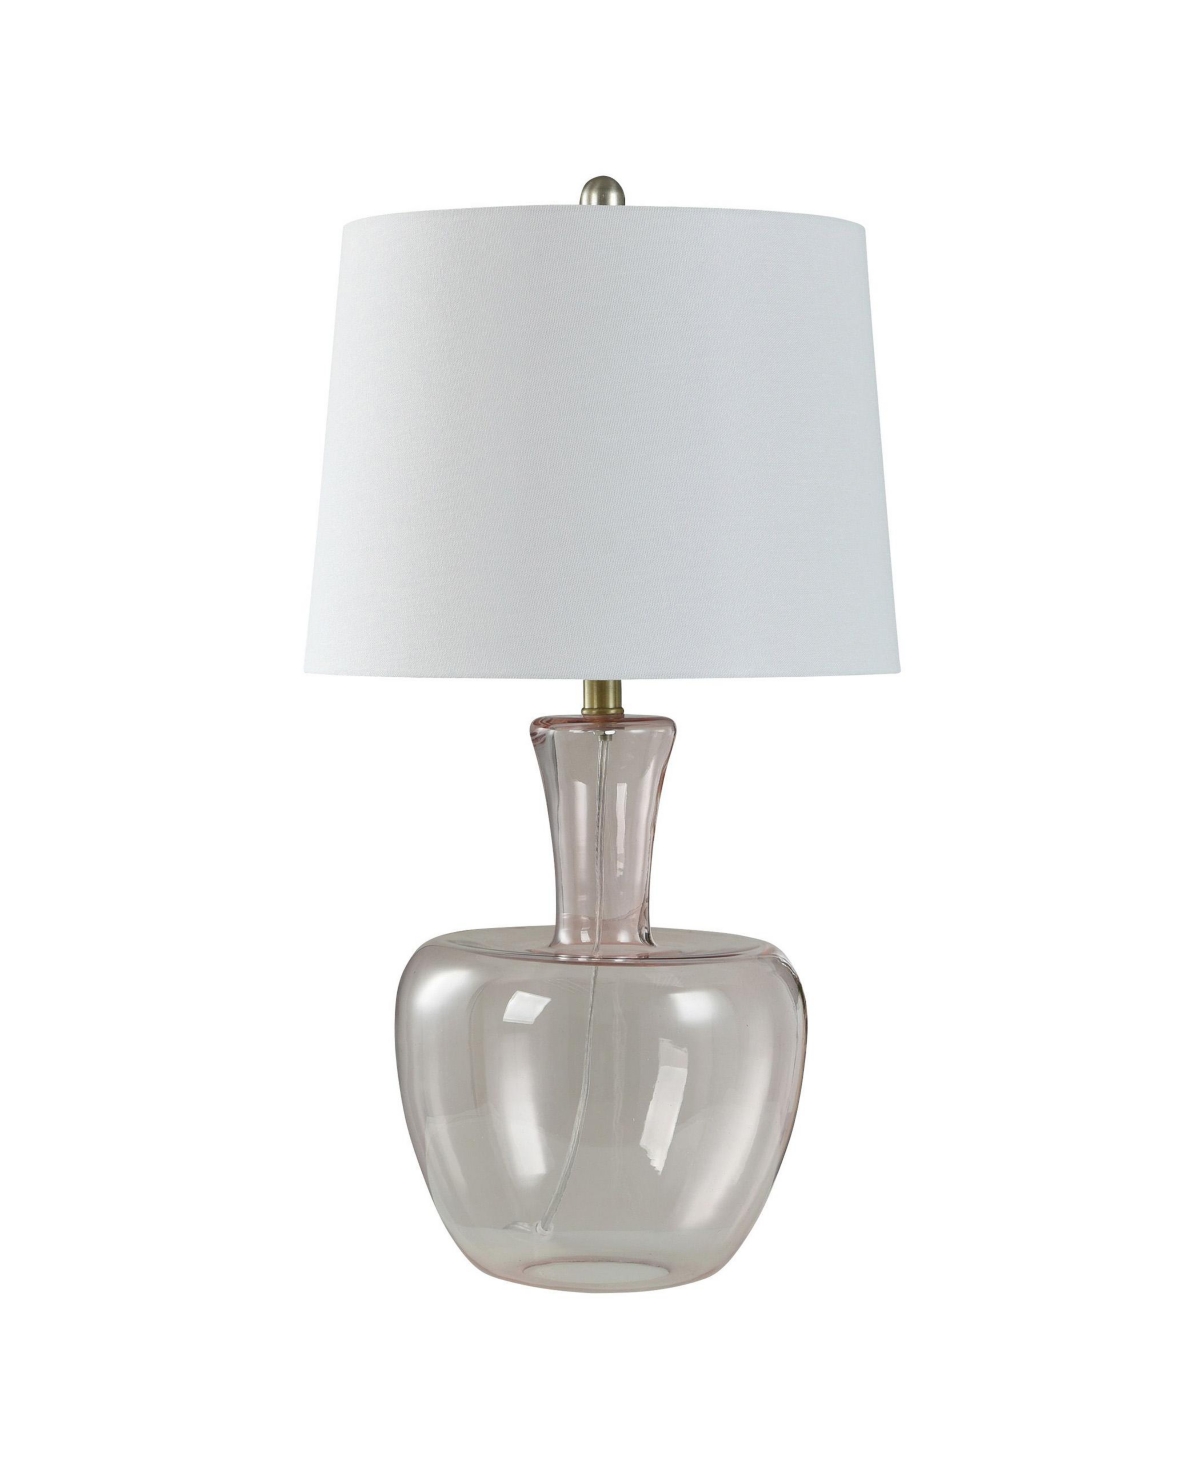 Stylecraft Home Collection 27.25" Blush Colored Glass With Gourd Shaped Base Table Lamp In Pink,translucent